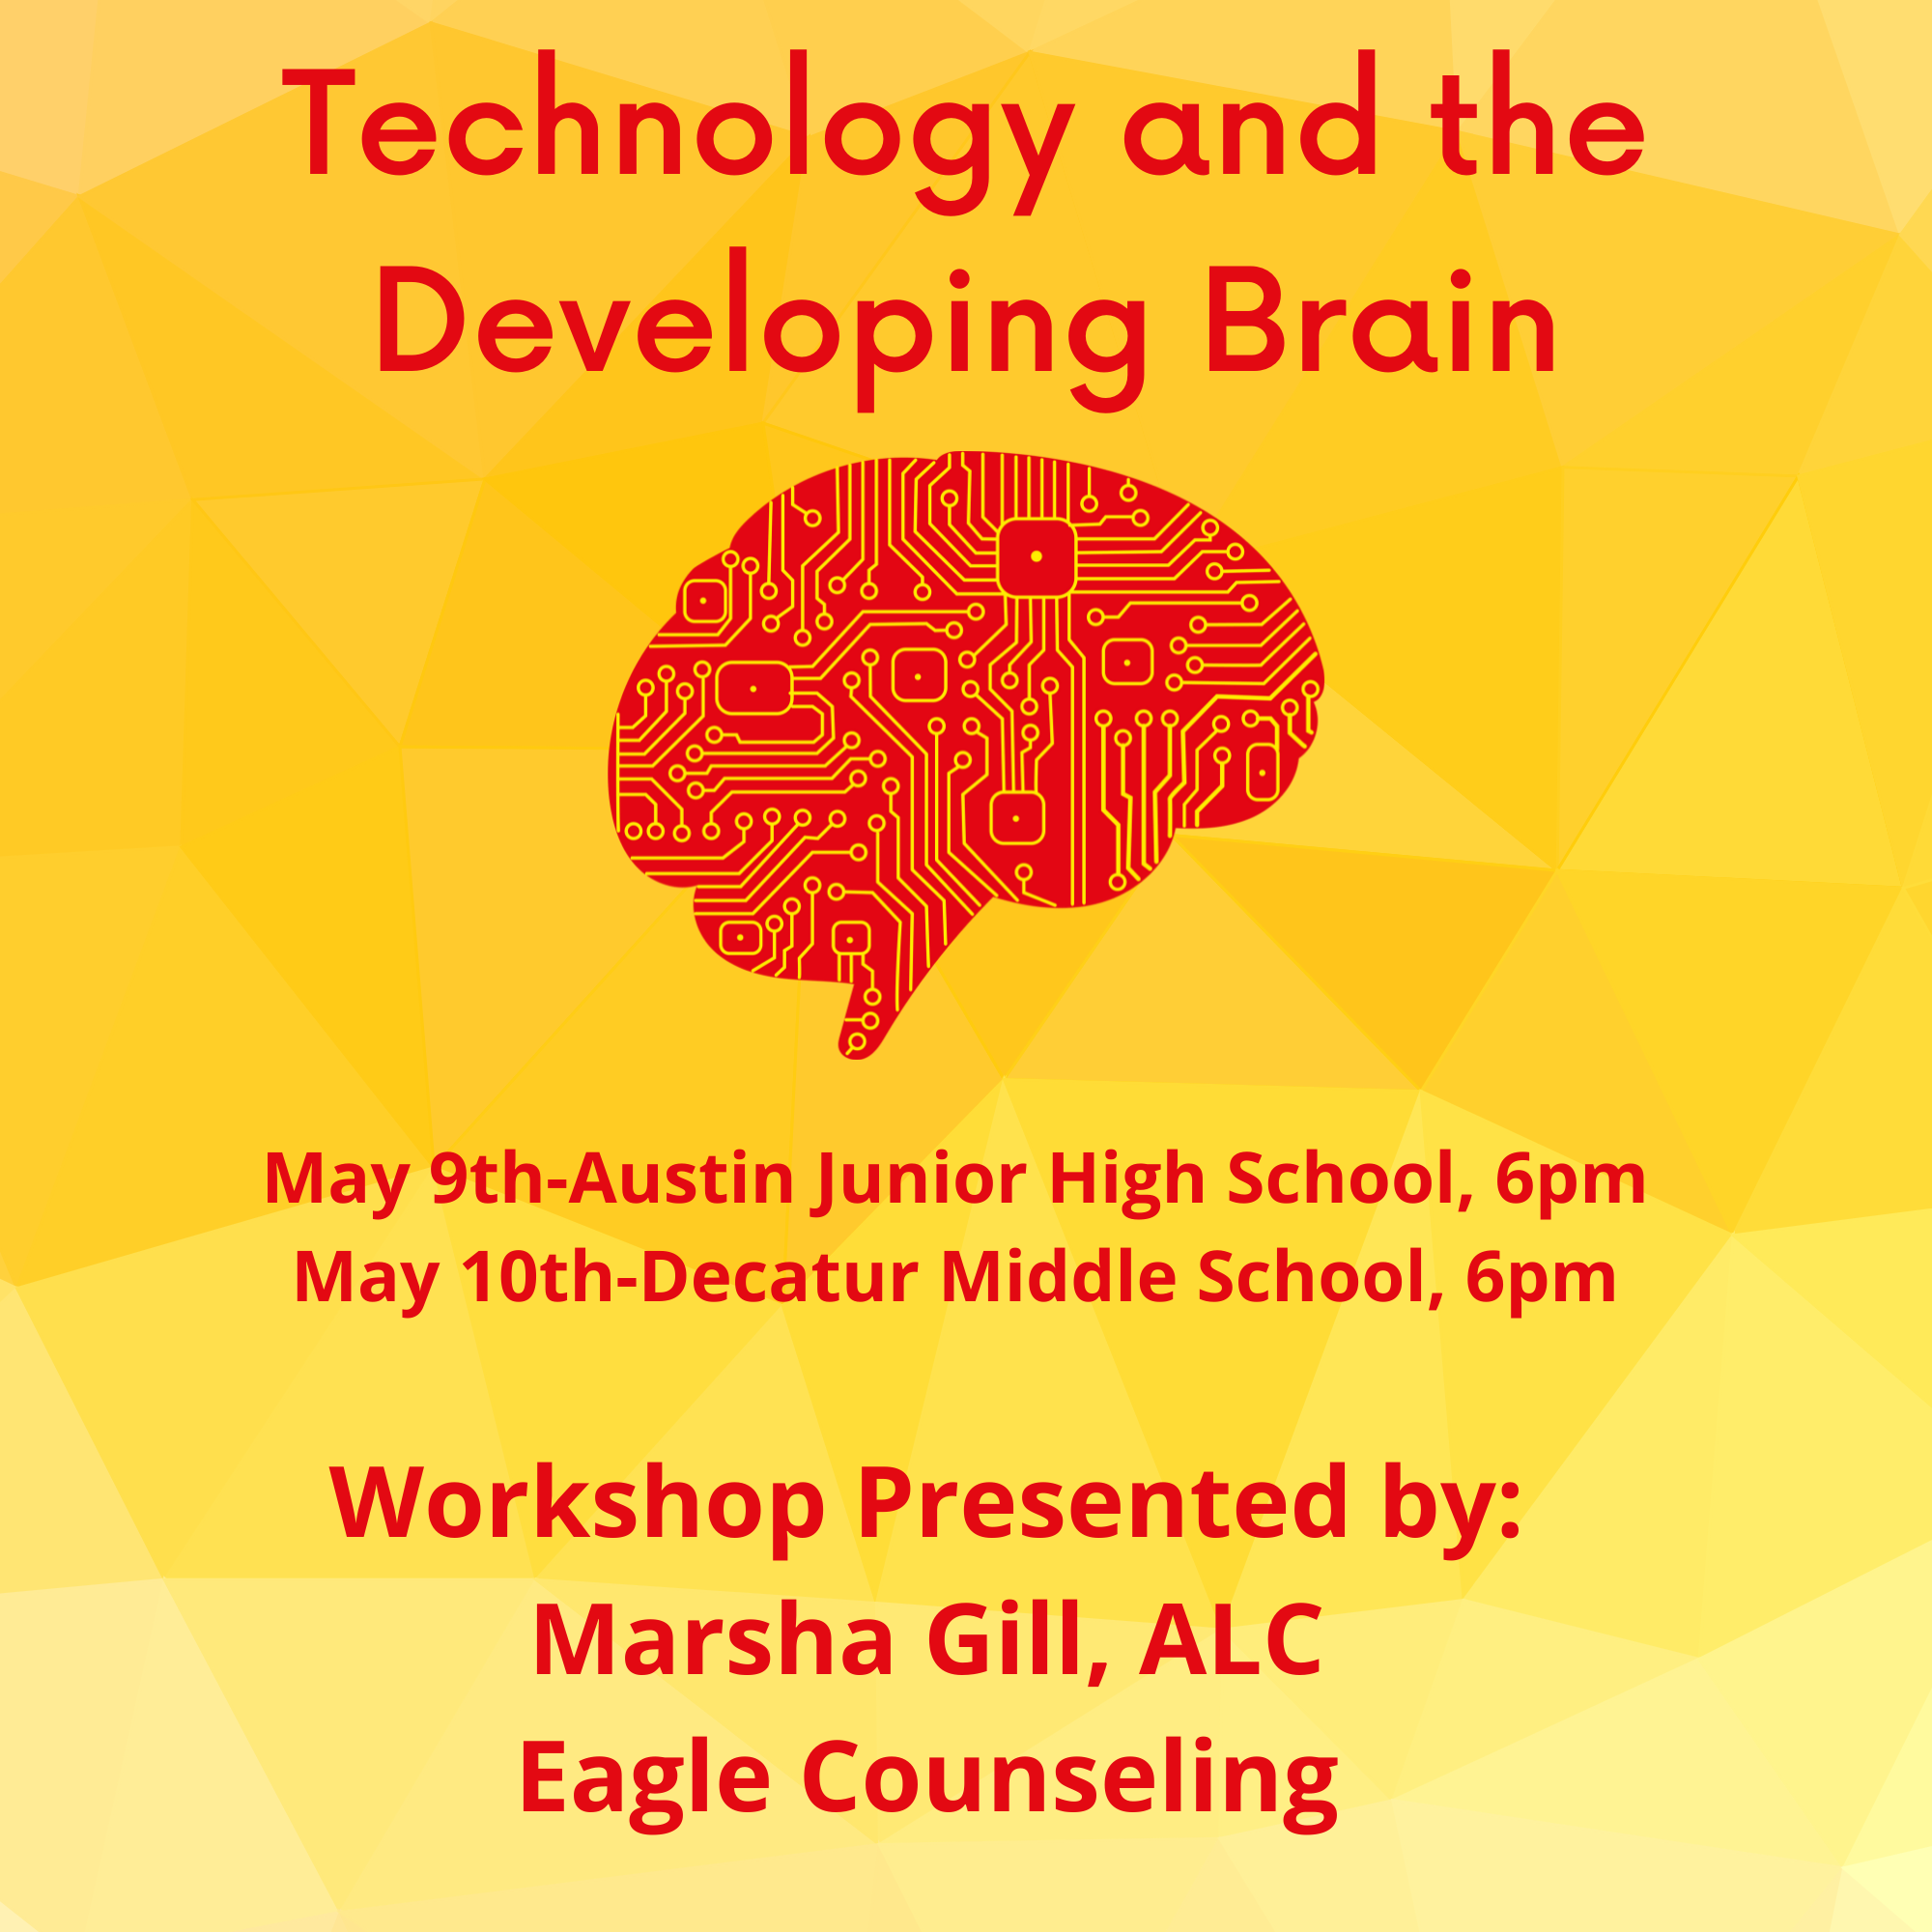 Flyer for Technology and the Developing Brain event. May 9th, 6pm, Austin Junior High School. Or May 10th, 6pm, Decatur Middle School. Workshop presented by Marsha Gill, ALC Eagle Counseling